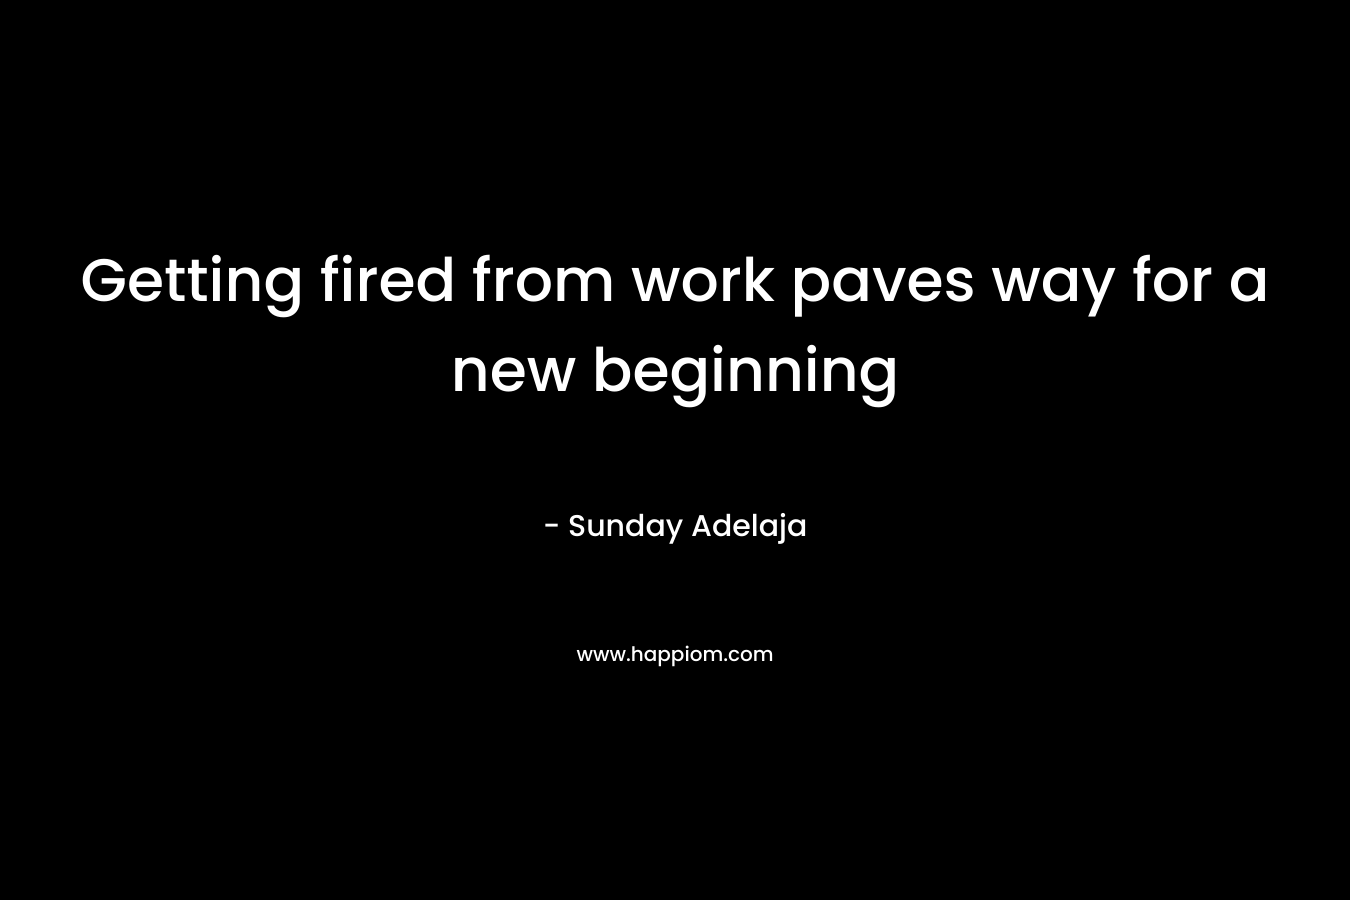 Getting fired from work paves way for a new beginning